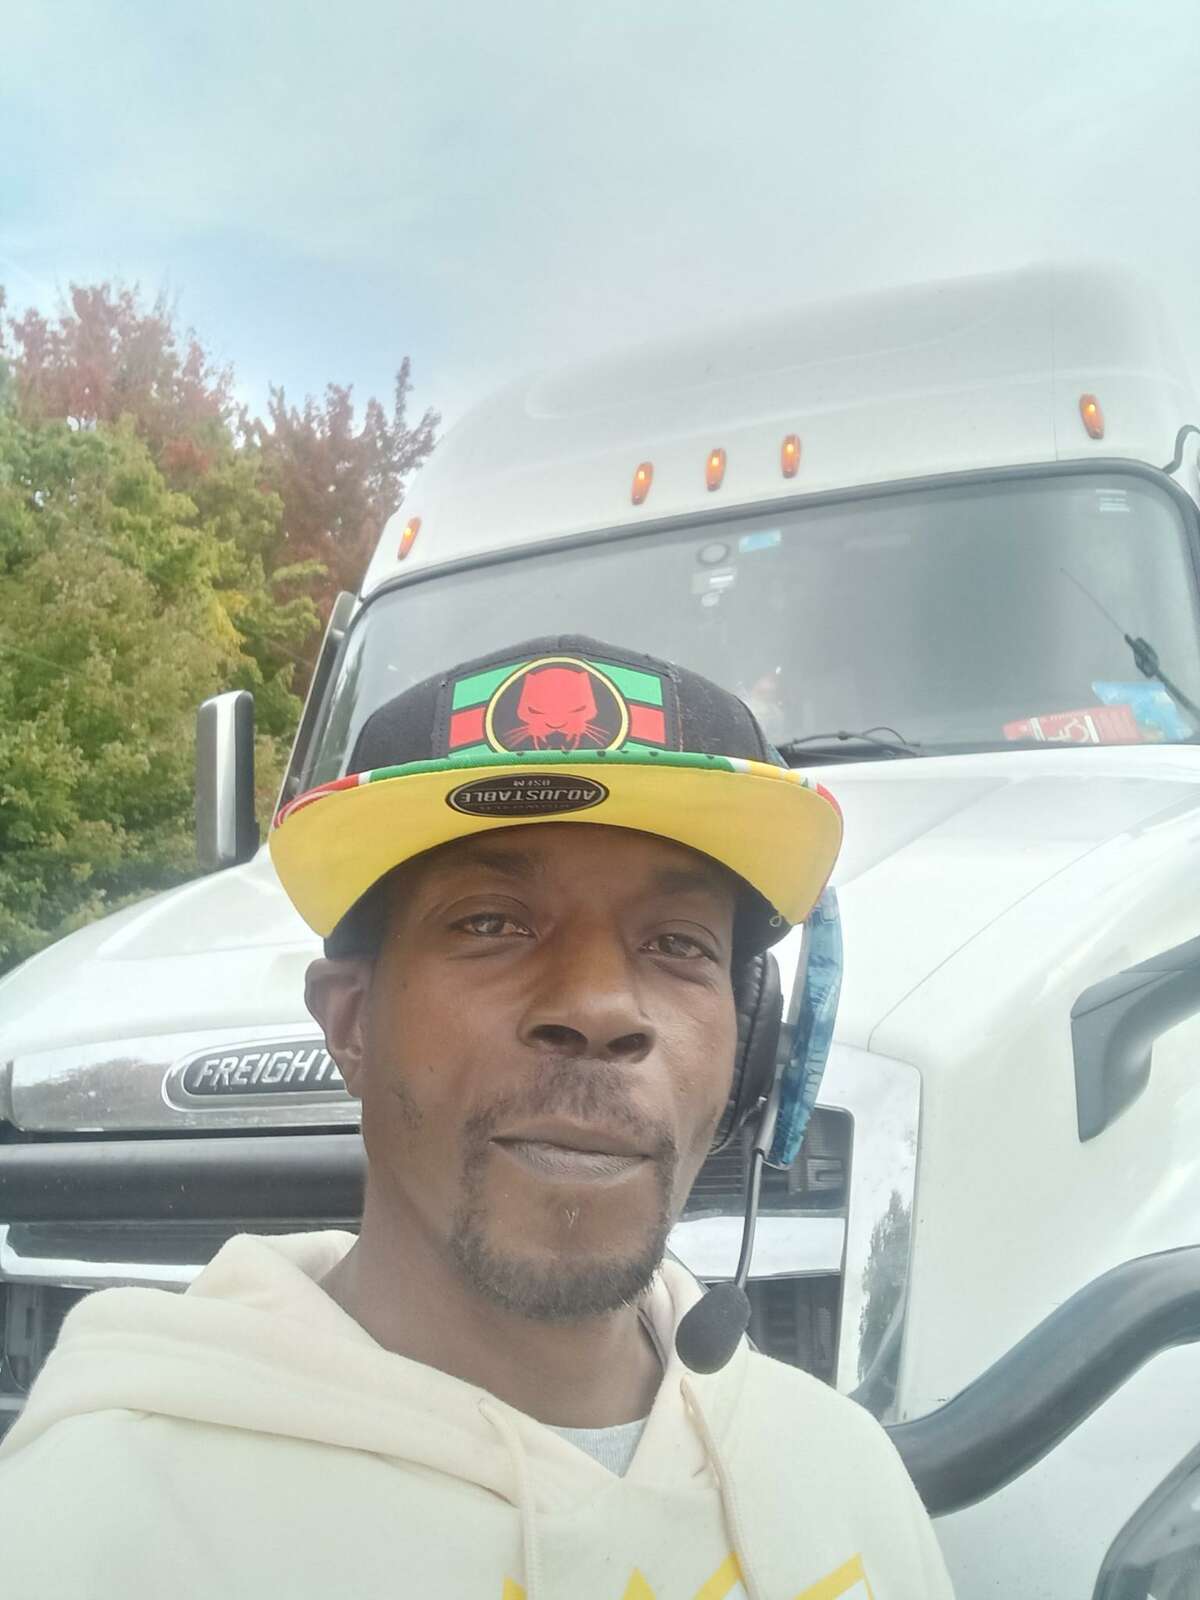 Damone Johnson, 43, received a commercial drivers license in August through the city of San Antonio's Ready to Work job training program. He's one of 10 people to land a job through the initiative so far.